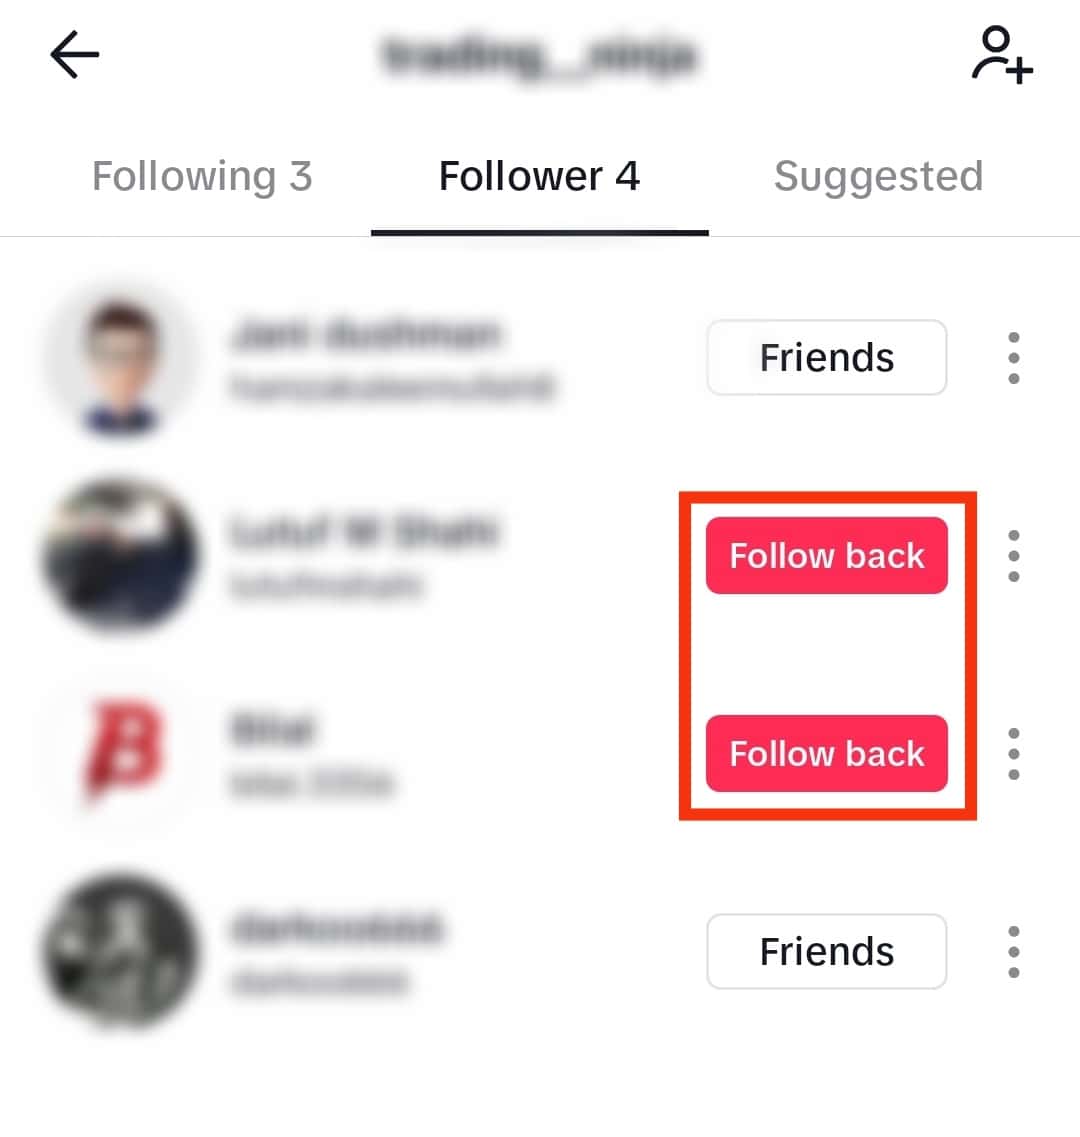 You'll See The Follow Back Label Instead